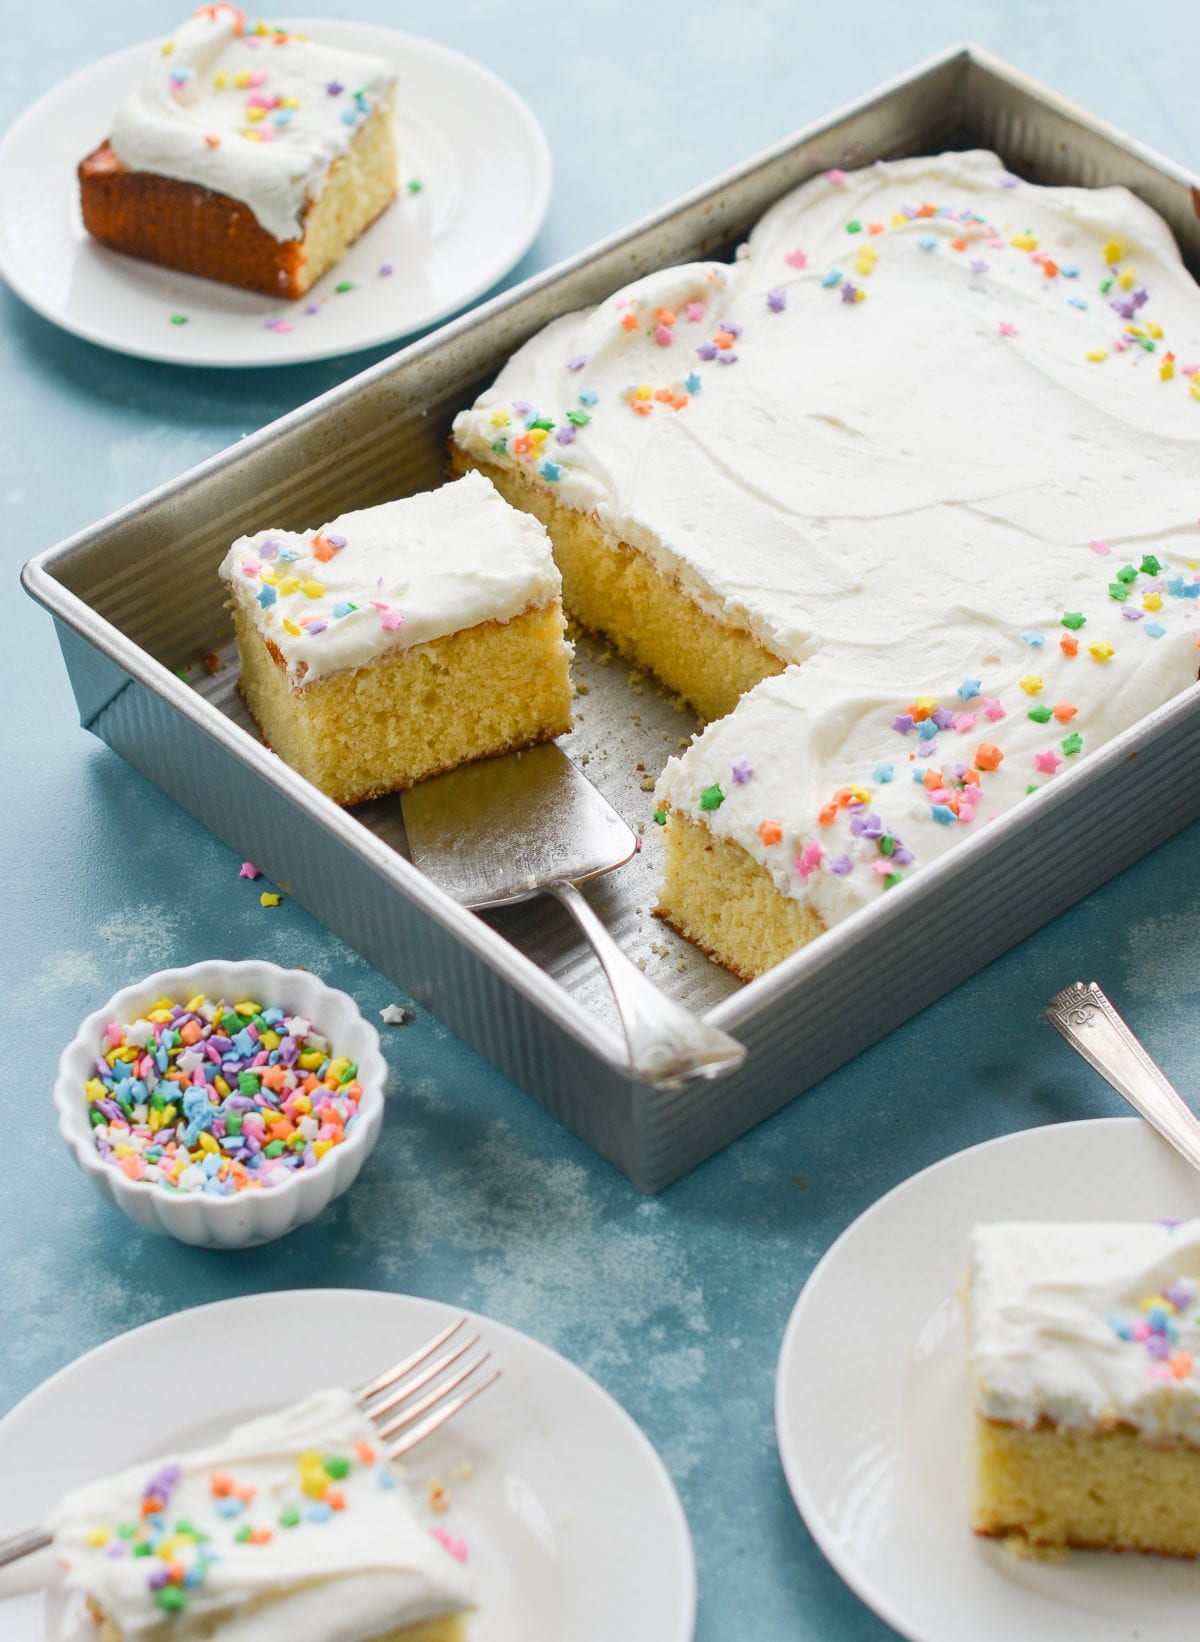 https://www.onceuponachef.com/images/2021/06/vanilla-sheet-cake-with-cream-cheese-frosting-1200x1642.jpg